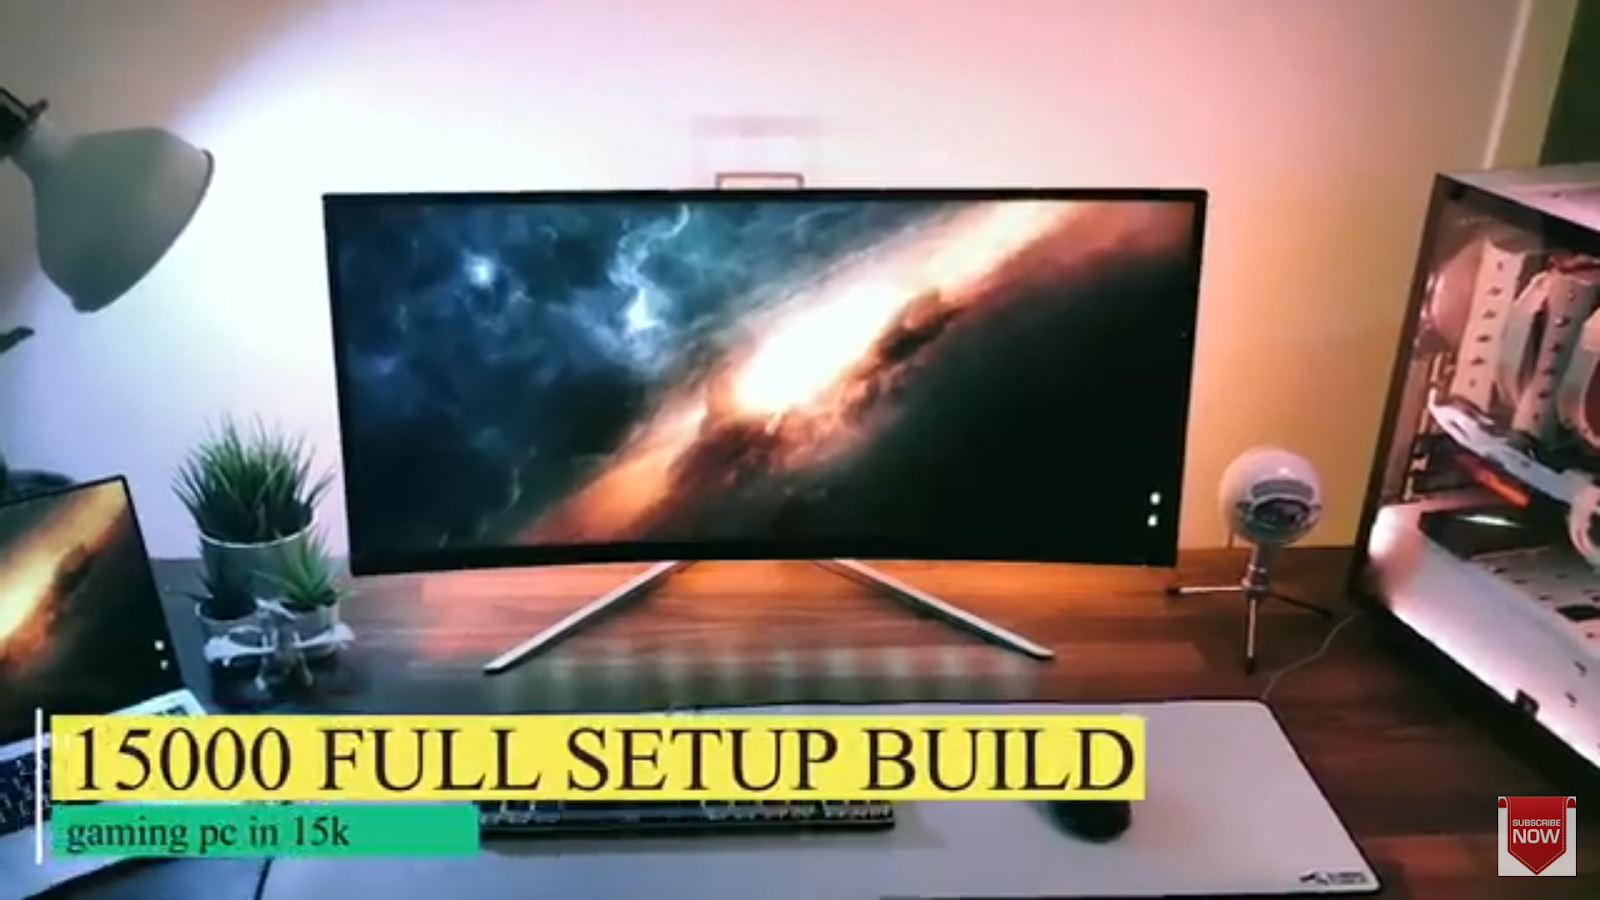 All In One Article Under Rs Full Setup Gaming Pc Build With Monitor Key Mouse